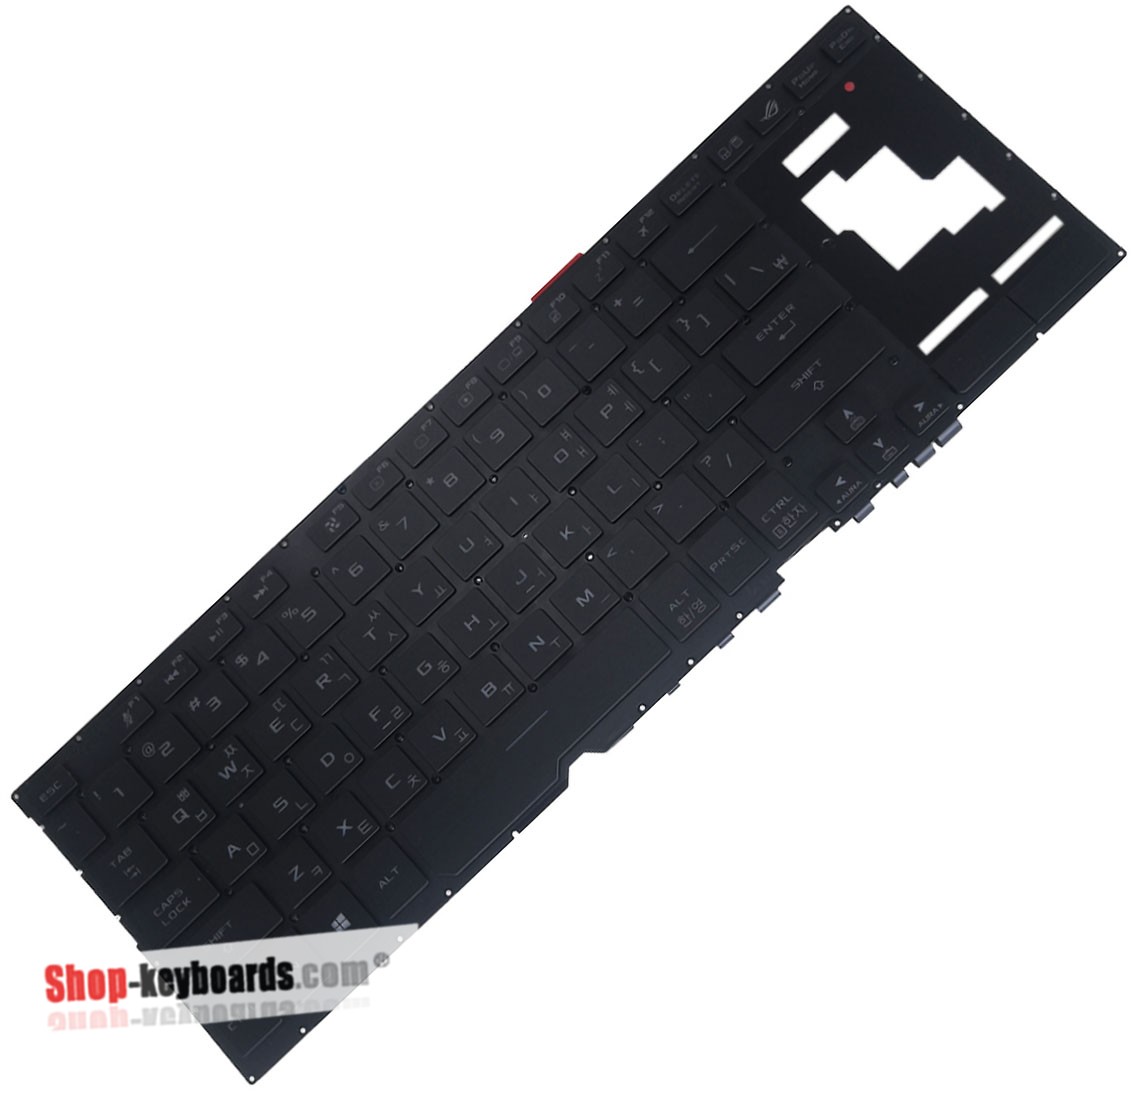 Asus ROG GX701LXS-HG054TS  Keyboard replacement